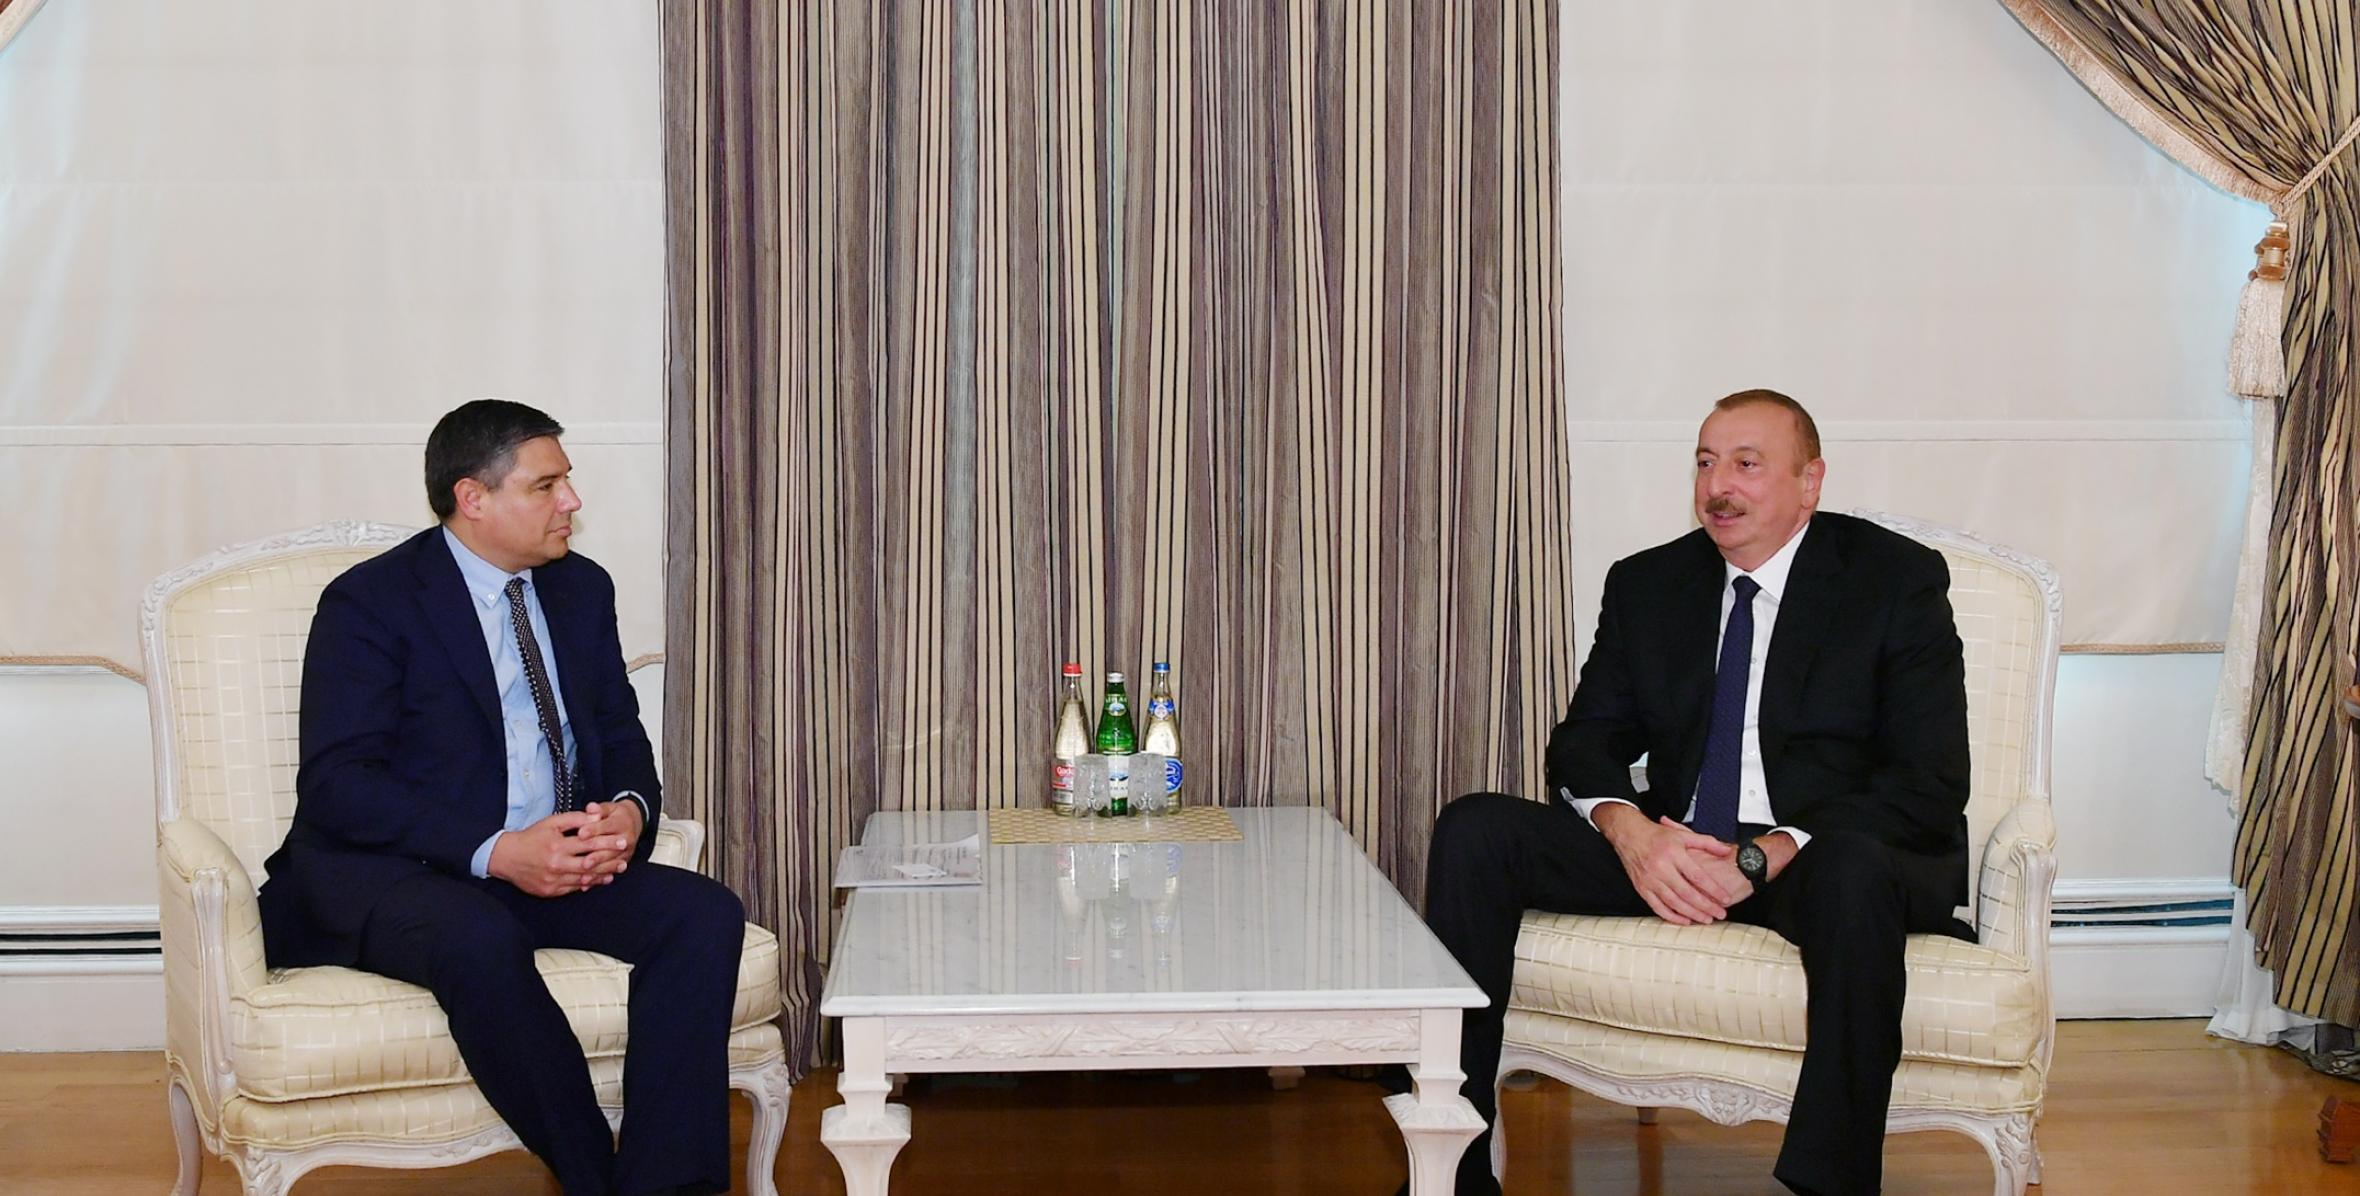 Ilham Aliyev received chairman and CEO of Baker Hughes, a GE company